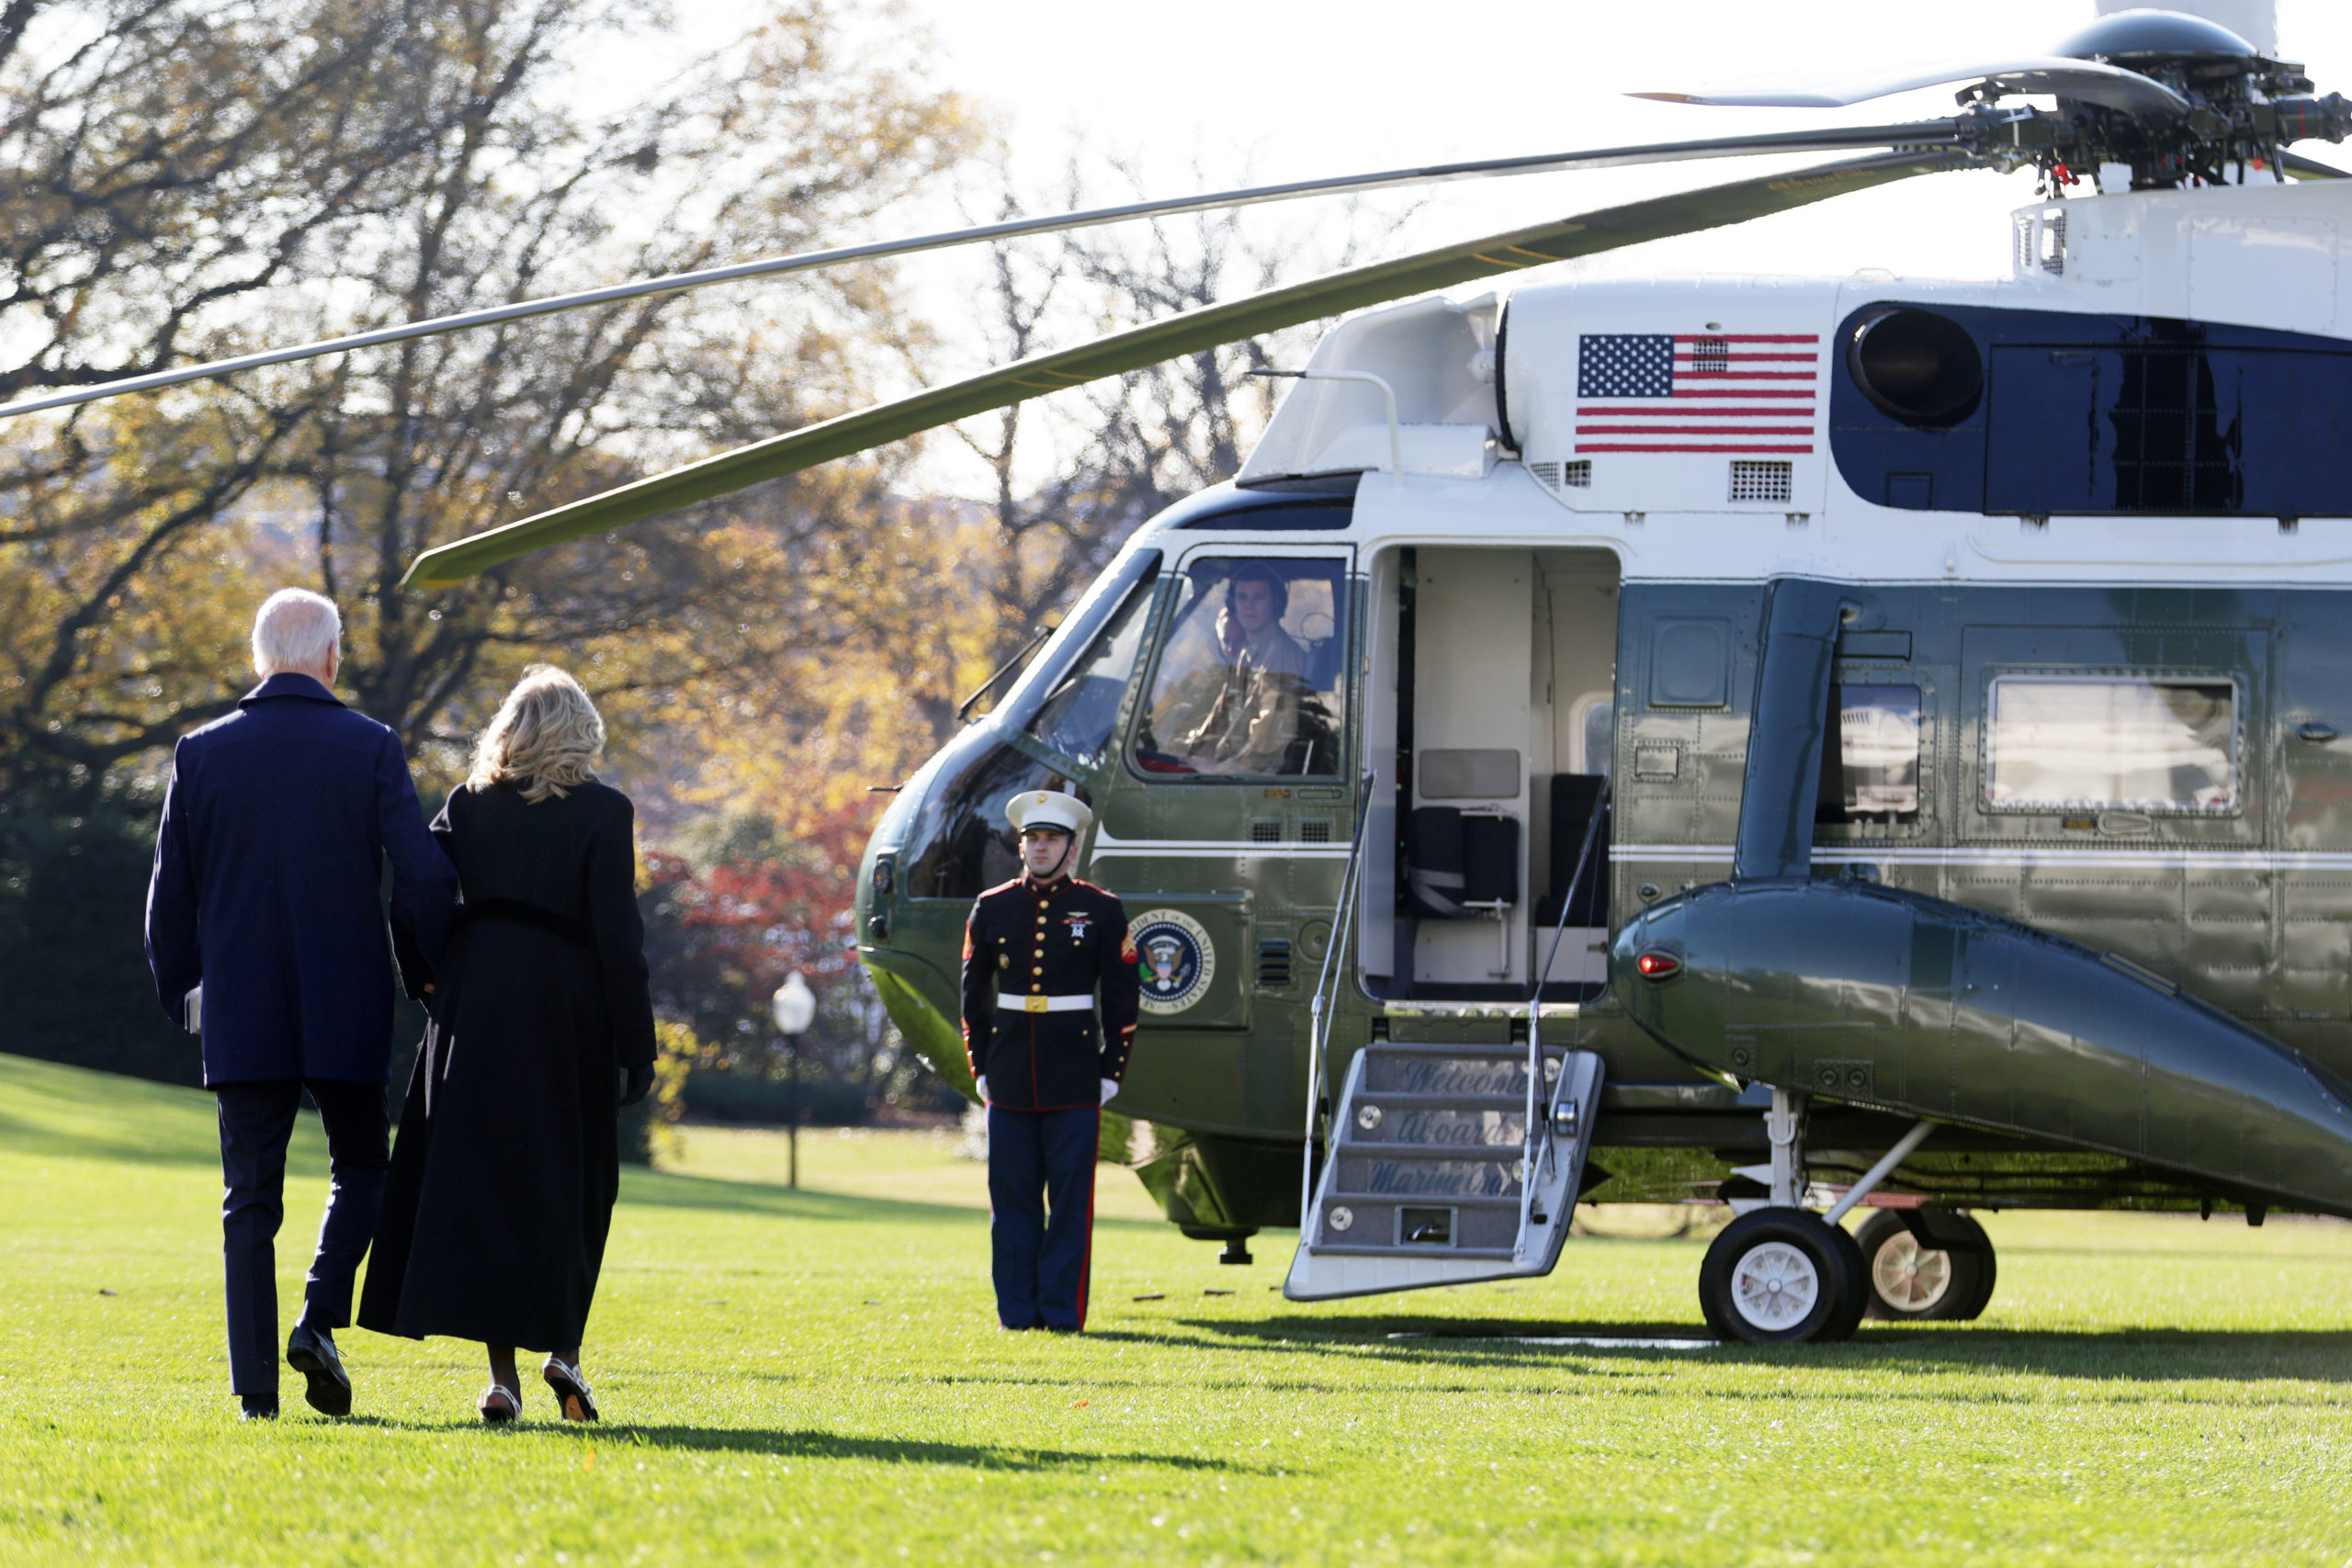 U.S. President Joe Biden and first lady Jill Biden walk to Marine One prior to a departure from the White House on November 28, 2023 in Washington, DC. The Bidens are travelling to Atlanta, Georgia to attend a tribute service for former first lady Rosalynn Carter, who passed away on November 19 at the age of 96. (Photo by Alex Wong/Getty Images)